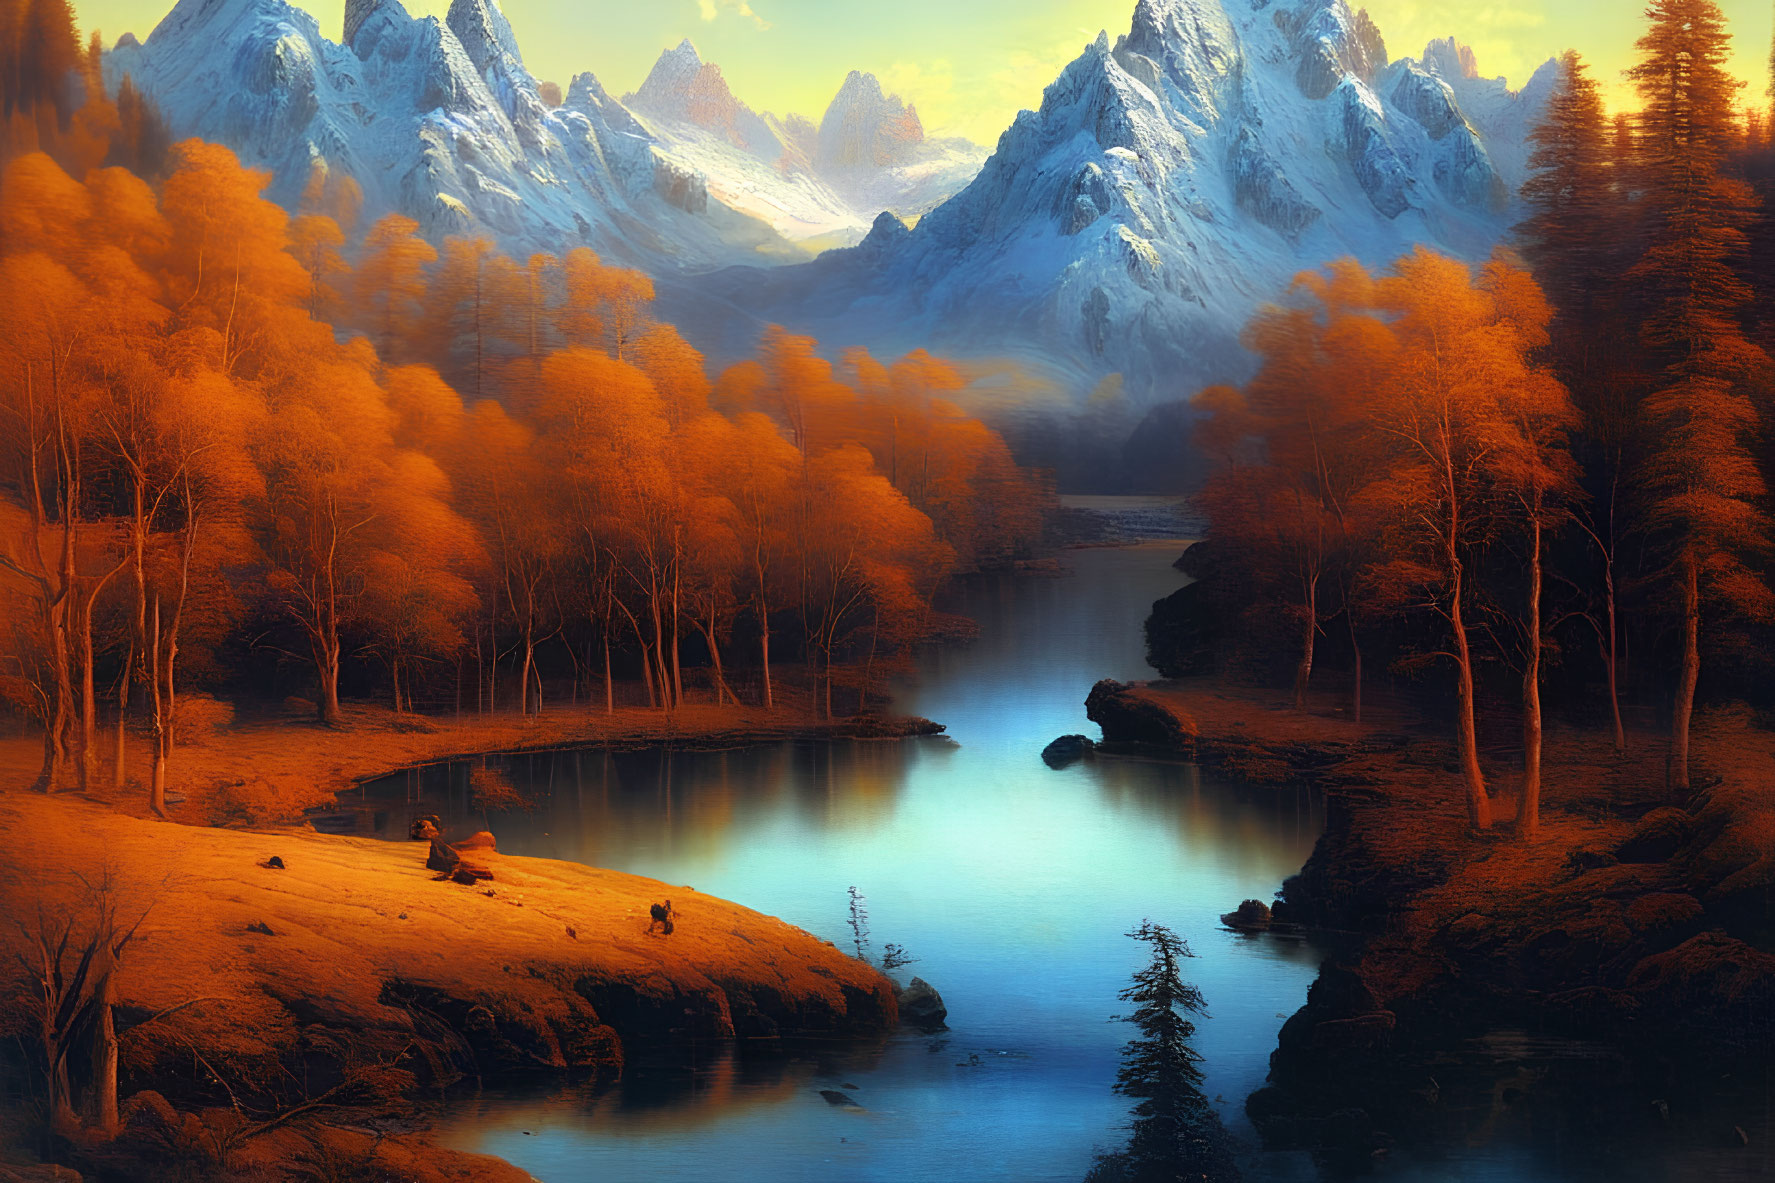 Tranquil autumn river scene with golden trees and snow-capped mountains